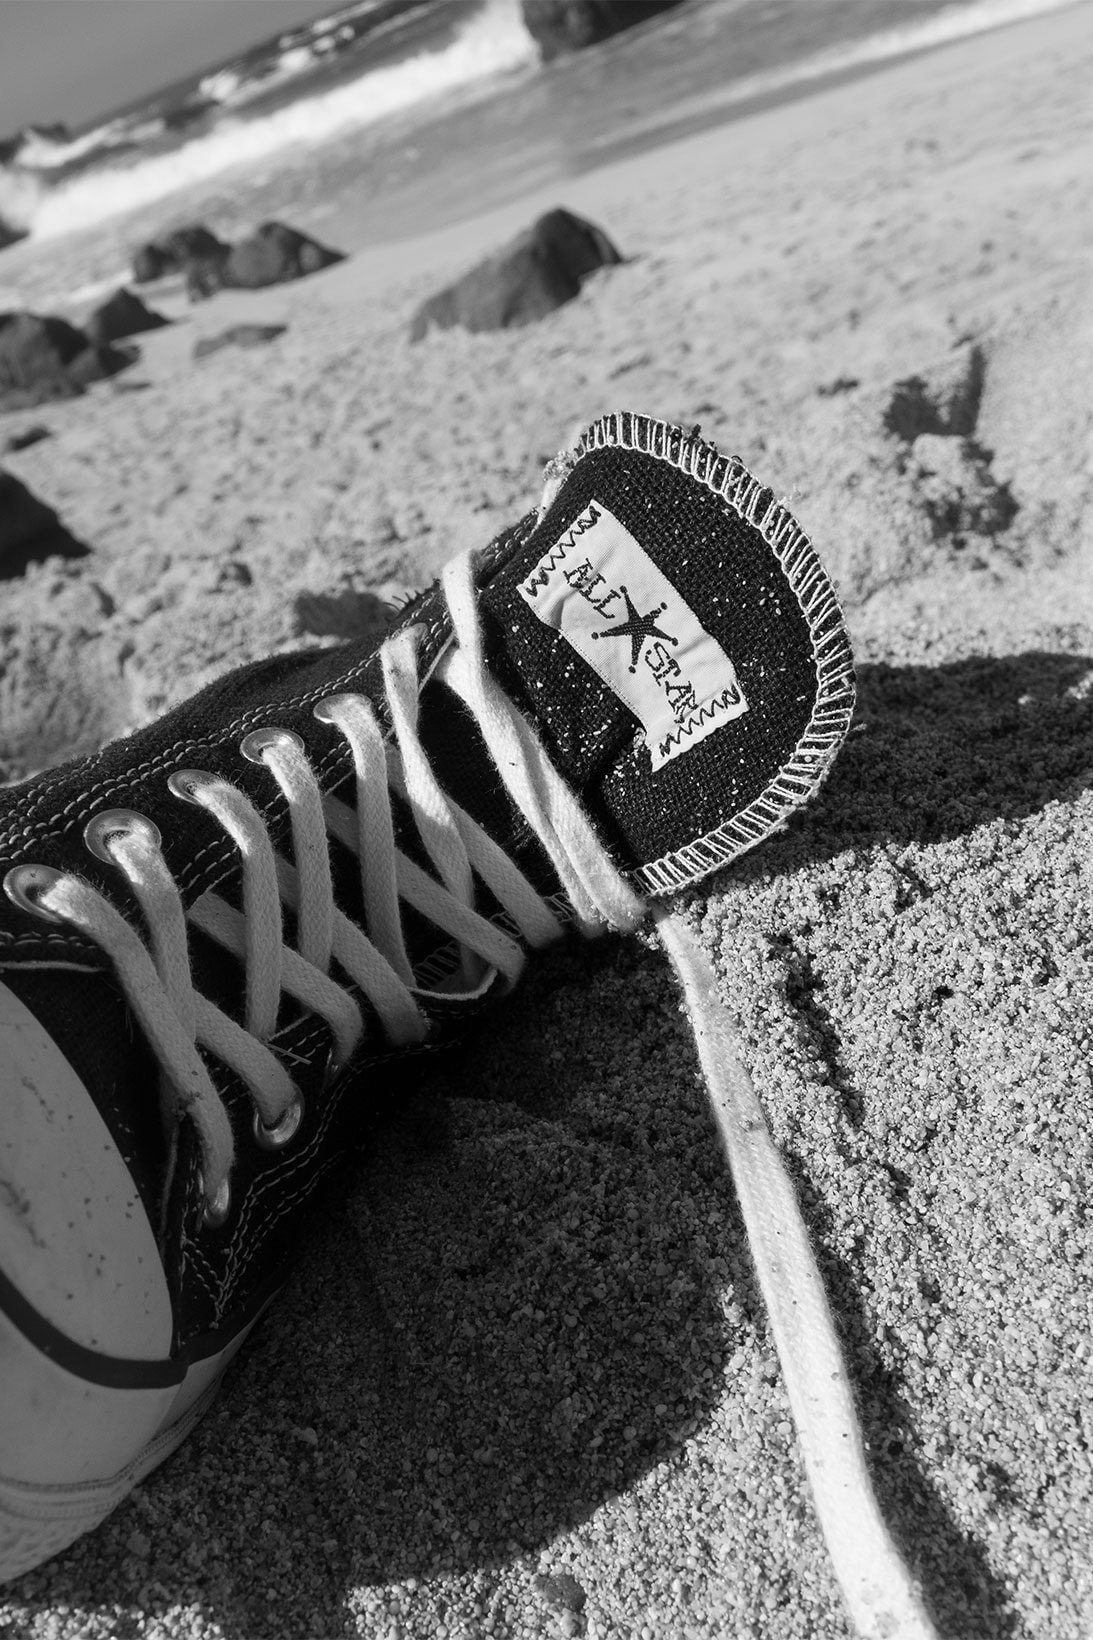 Stussy Converse Chuck 70 One Star Collaboration Official Images Release Price Info